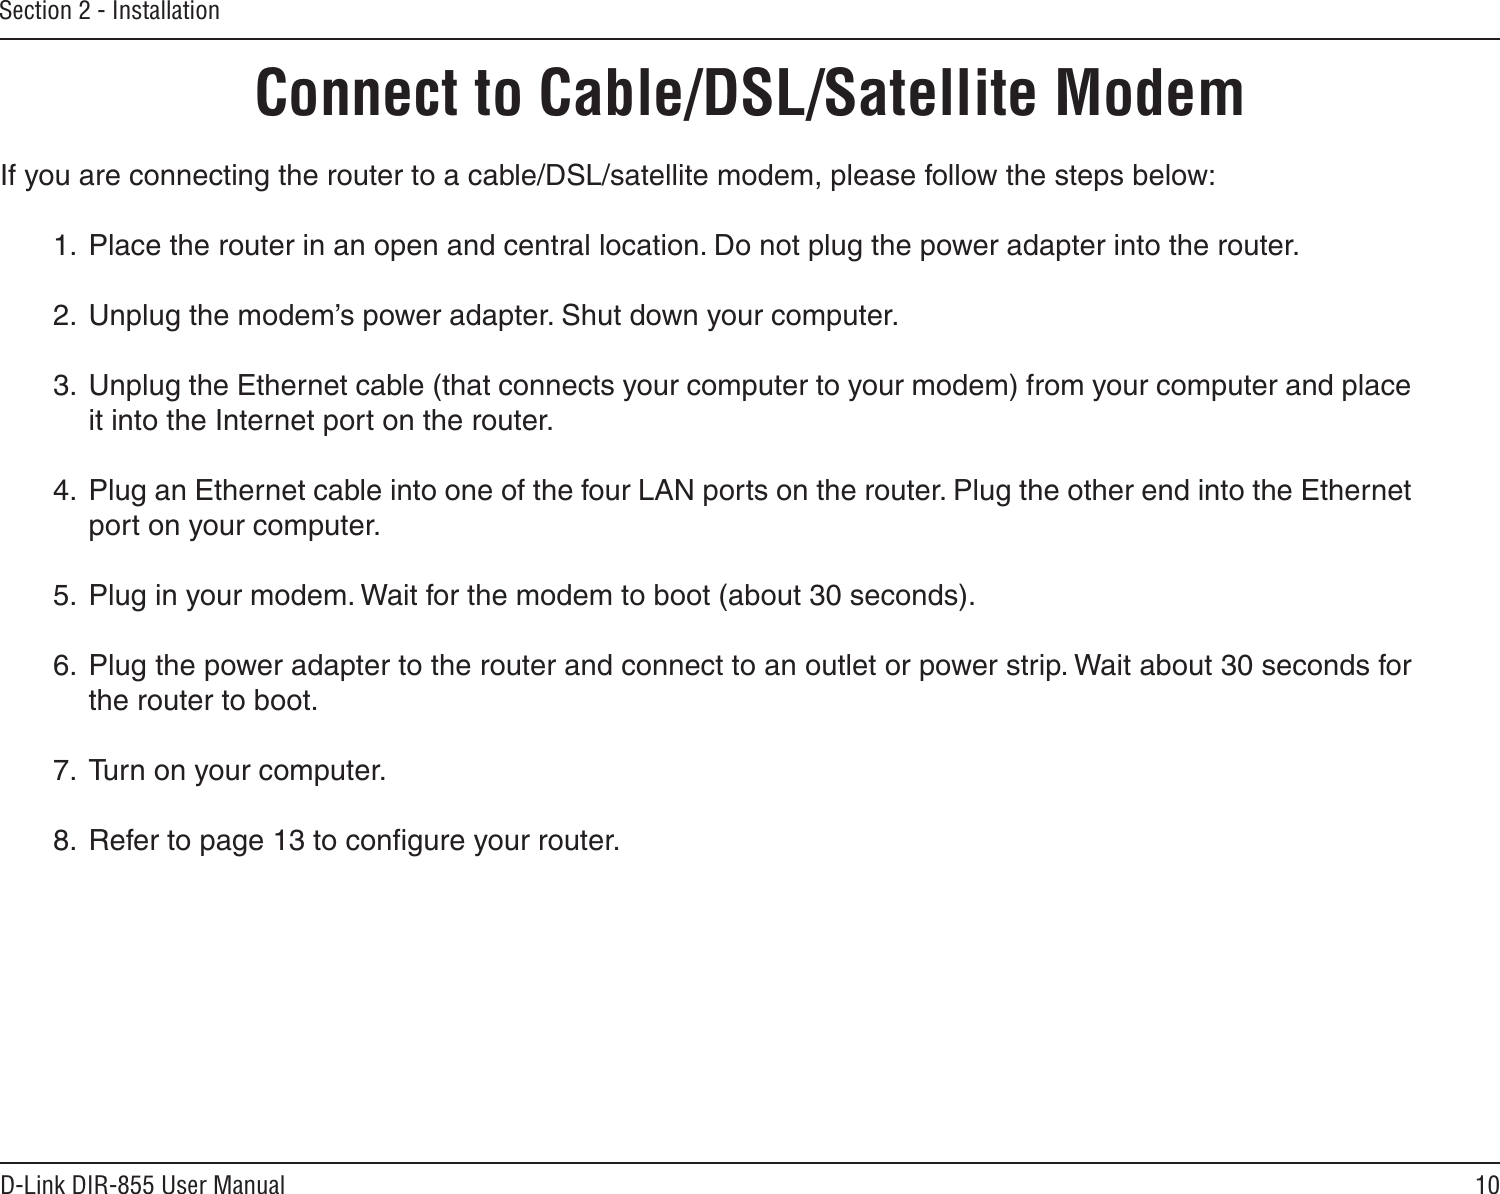 10D-Link DIR-855 User ManualSection 2 - InstallationIf you are connecting the router to a cable/DSL/satellite modem, please follow the steps below:1.  Place the router in an open and central location. Do not plug the power adapter into the router.2.  Unplug the modem’s power adapter. Shut down your computer.3.  Unplug the Ethernet cable (that connects your computer to your modem) from your computer and place it into the Internet port on the router.4.  Plug an Ethernet cable into one of the four LAN ports on the router. Plug the other end into the Ethernet port on your computer.5.  Plug in your modem. Wait for the modem to boot (about 30 seconds).6.  Plug the power adapter to the router and connect to an outlet or power strip. Wait about 30 seconds for the router to boot.7.  Turn on your computer.8.  Refer to page 13 to conﬁgure your router.Connect to Cable/DSL/Satellite Modem